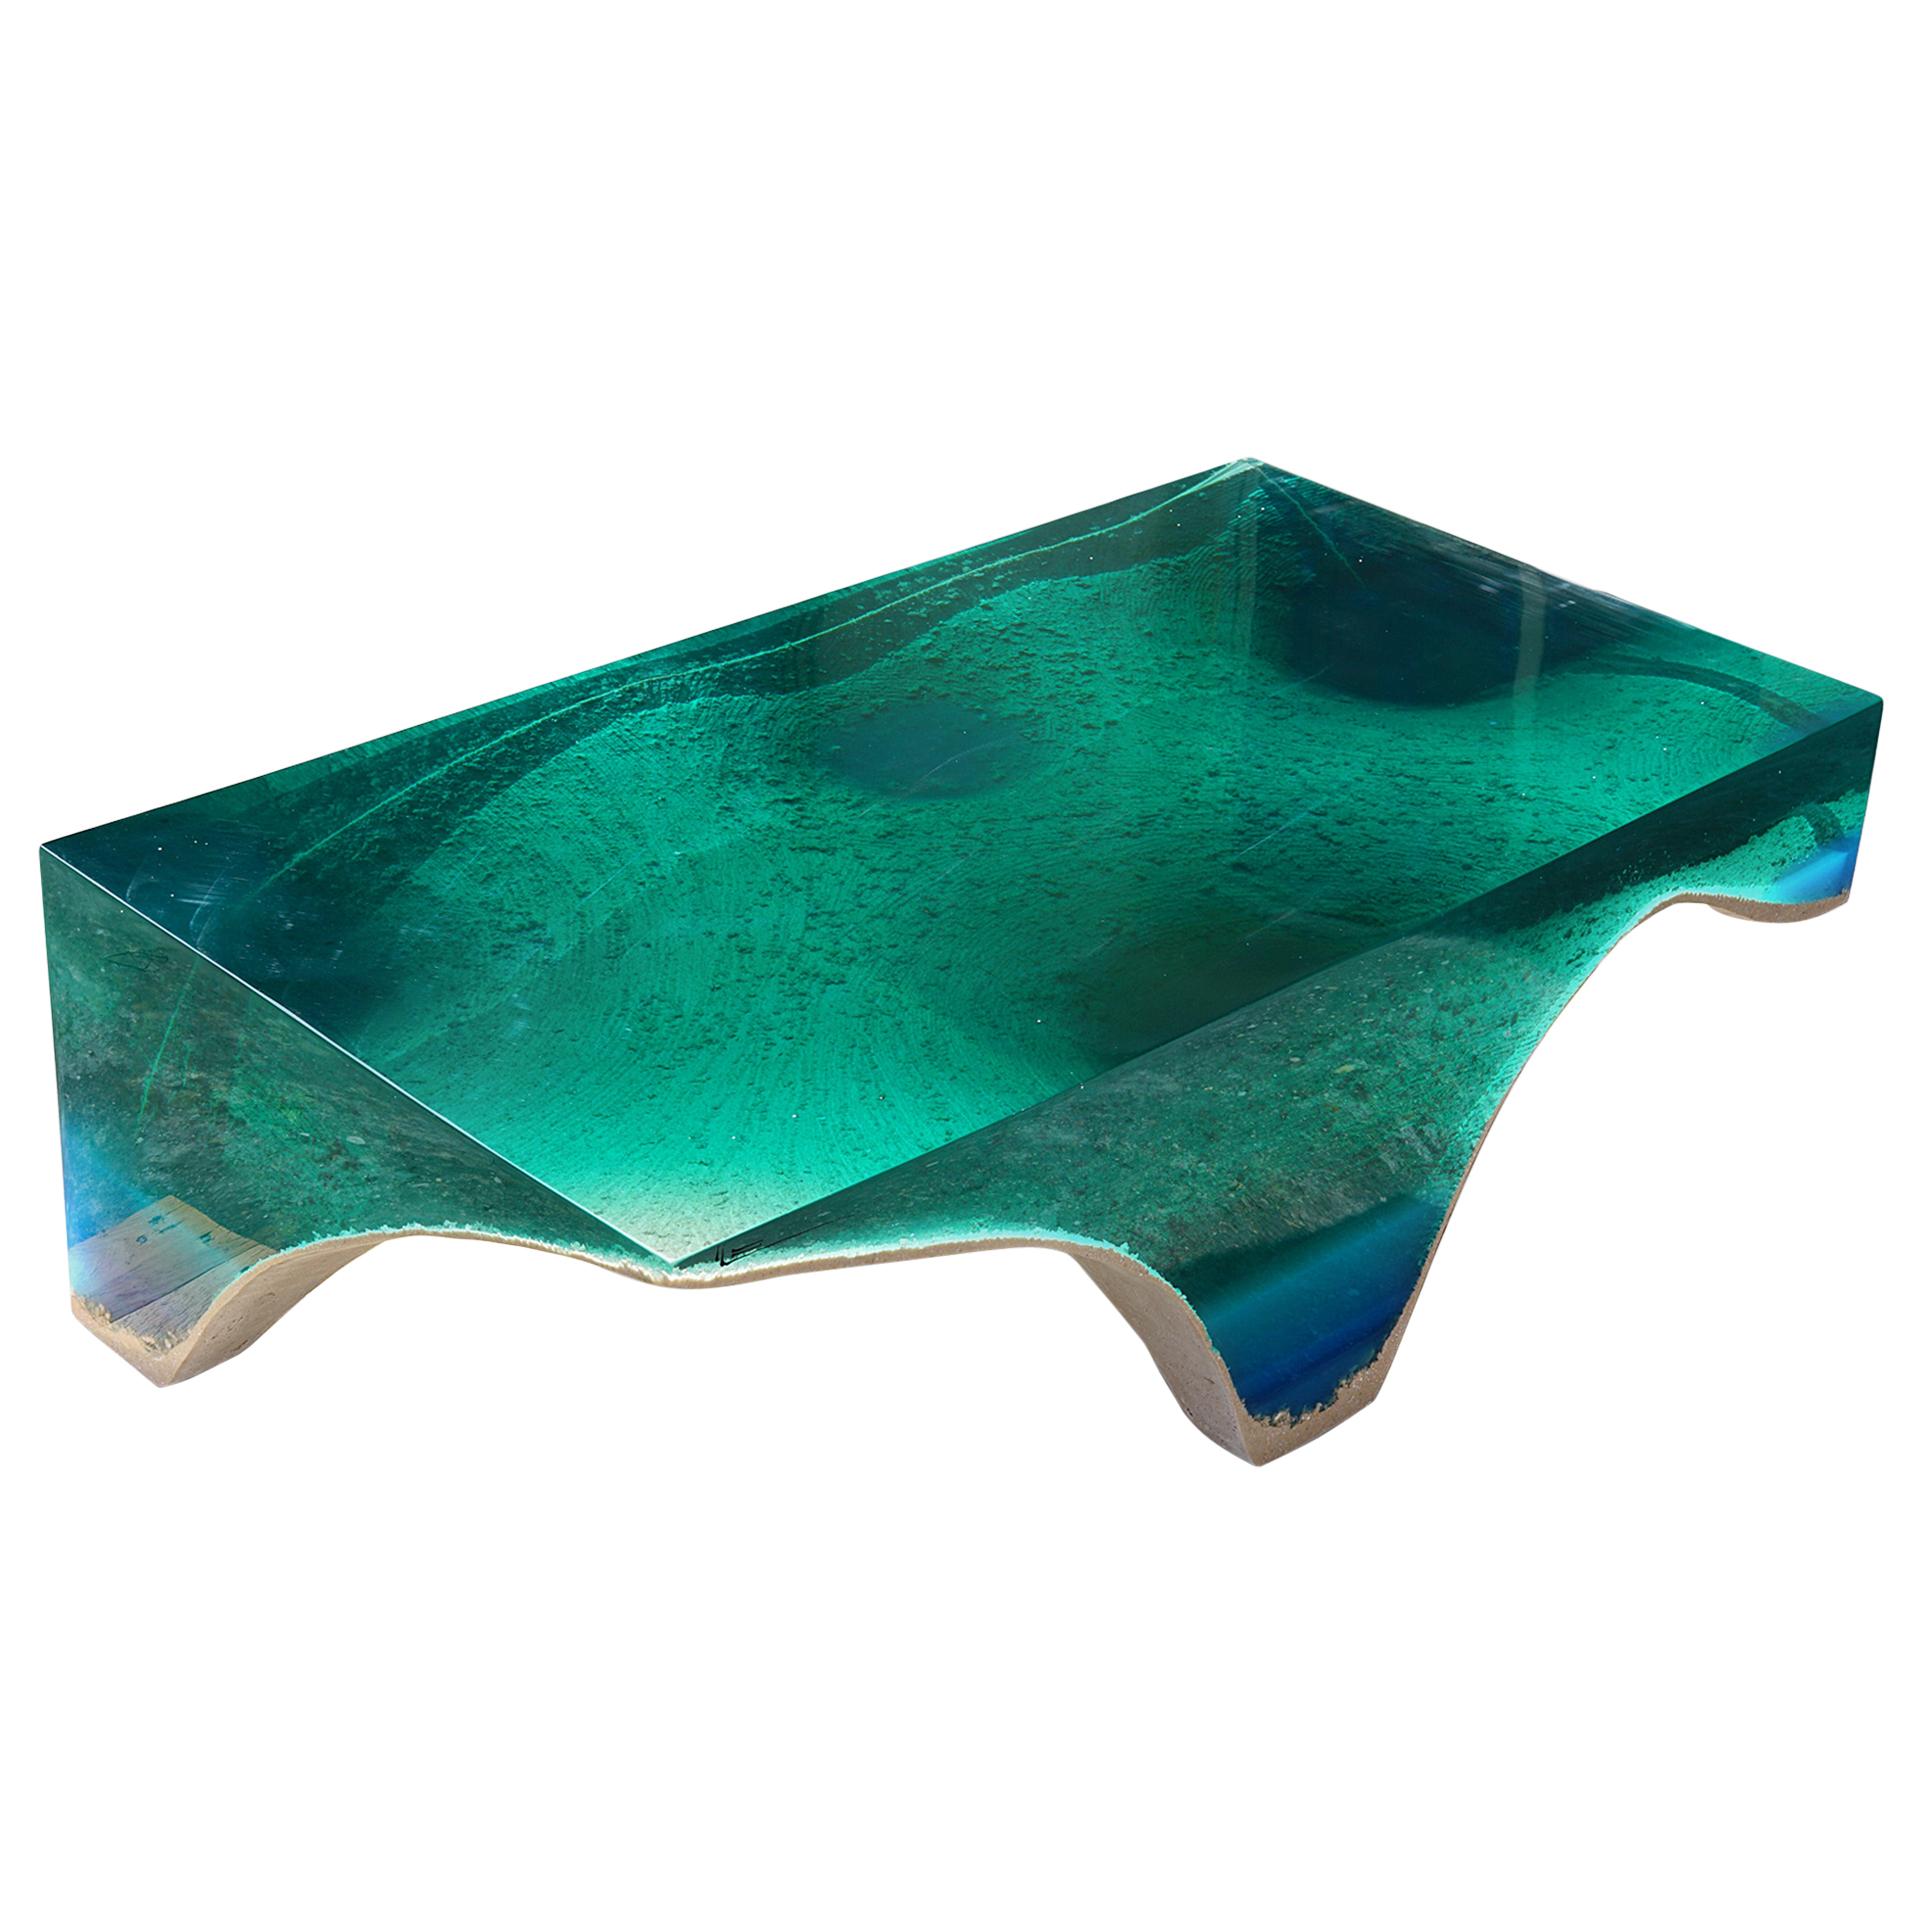 Delmare Coffee Table - by Eduard Locota. Green-Turquoise Acrylic Glass & Marble